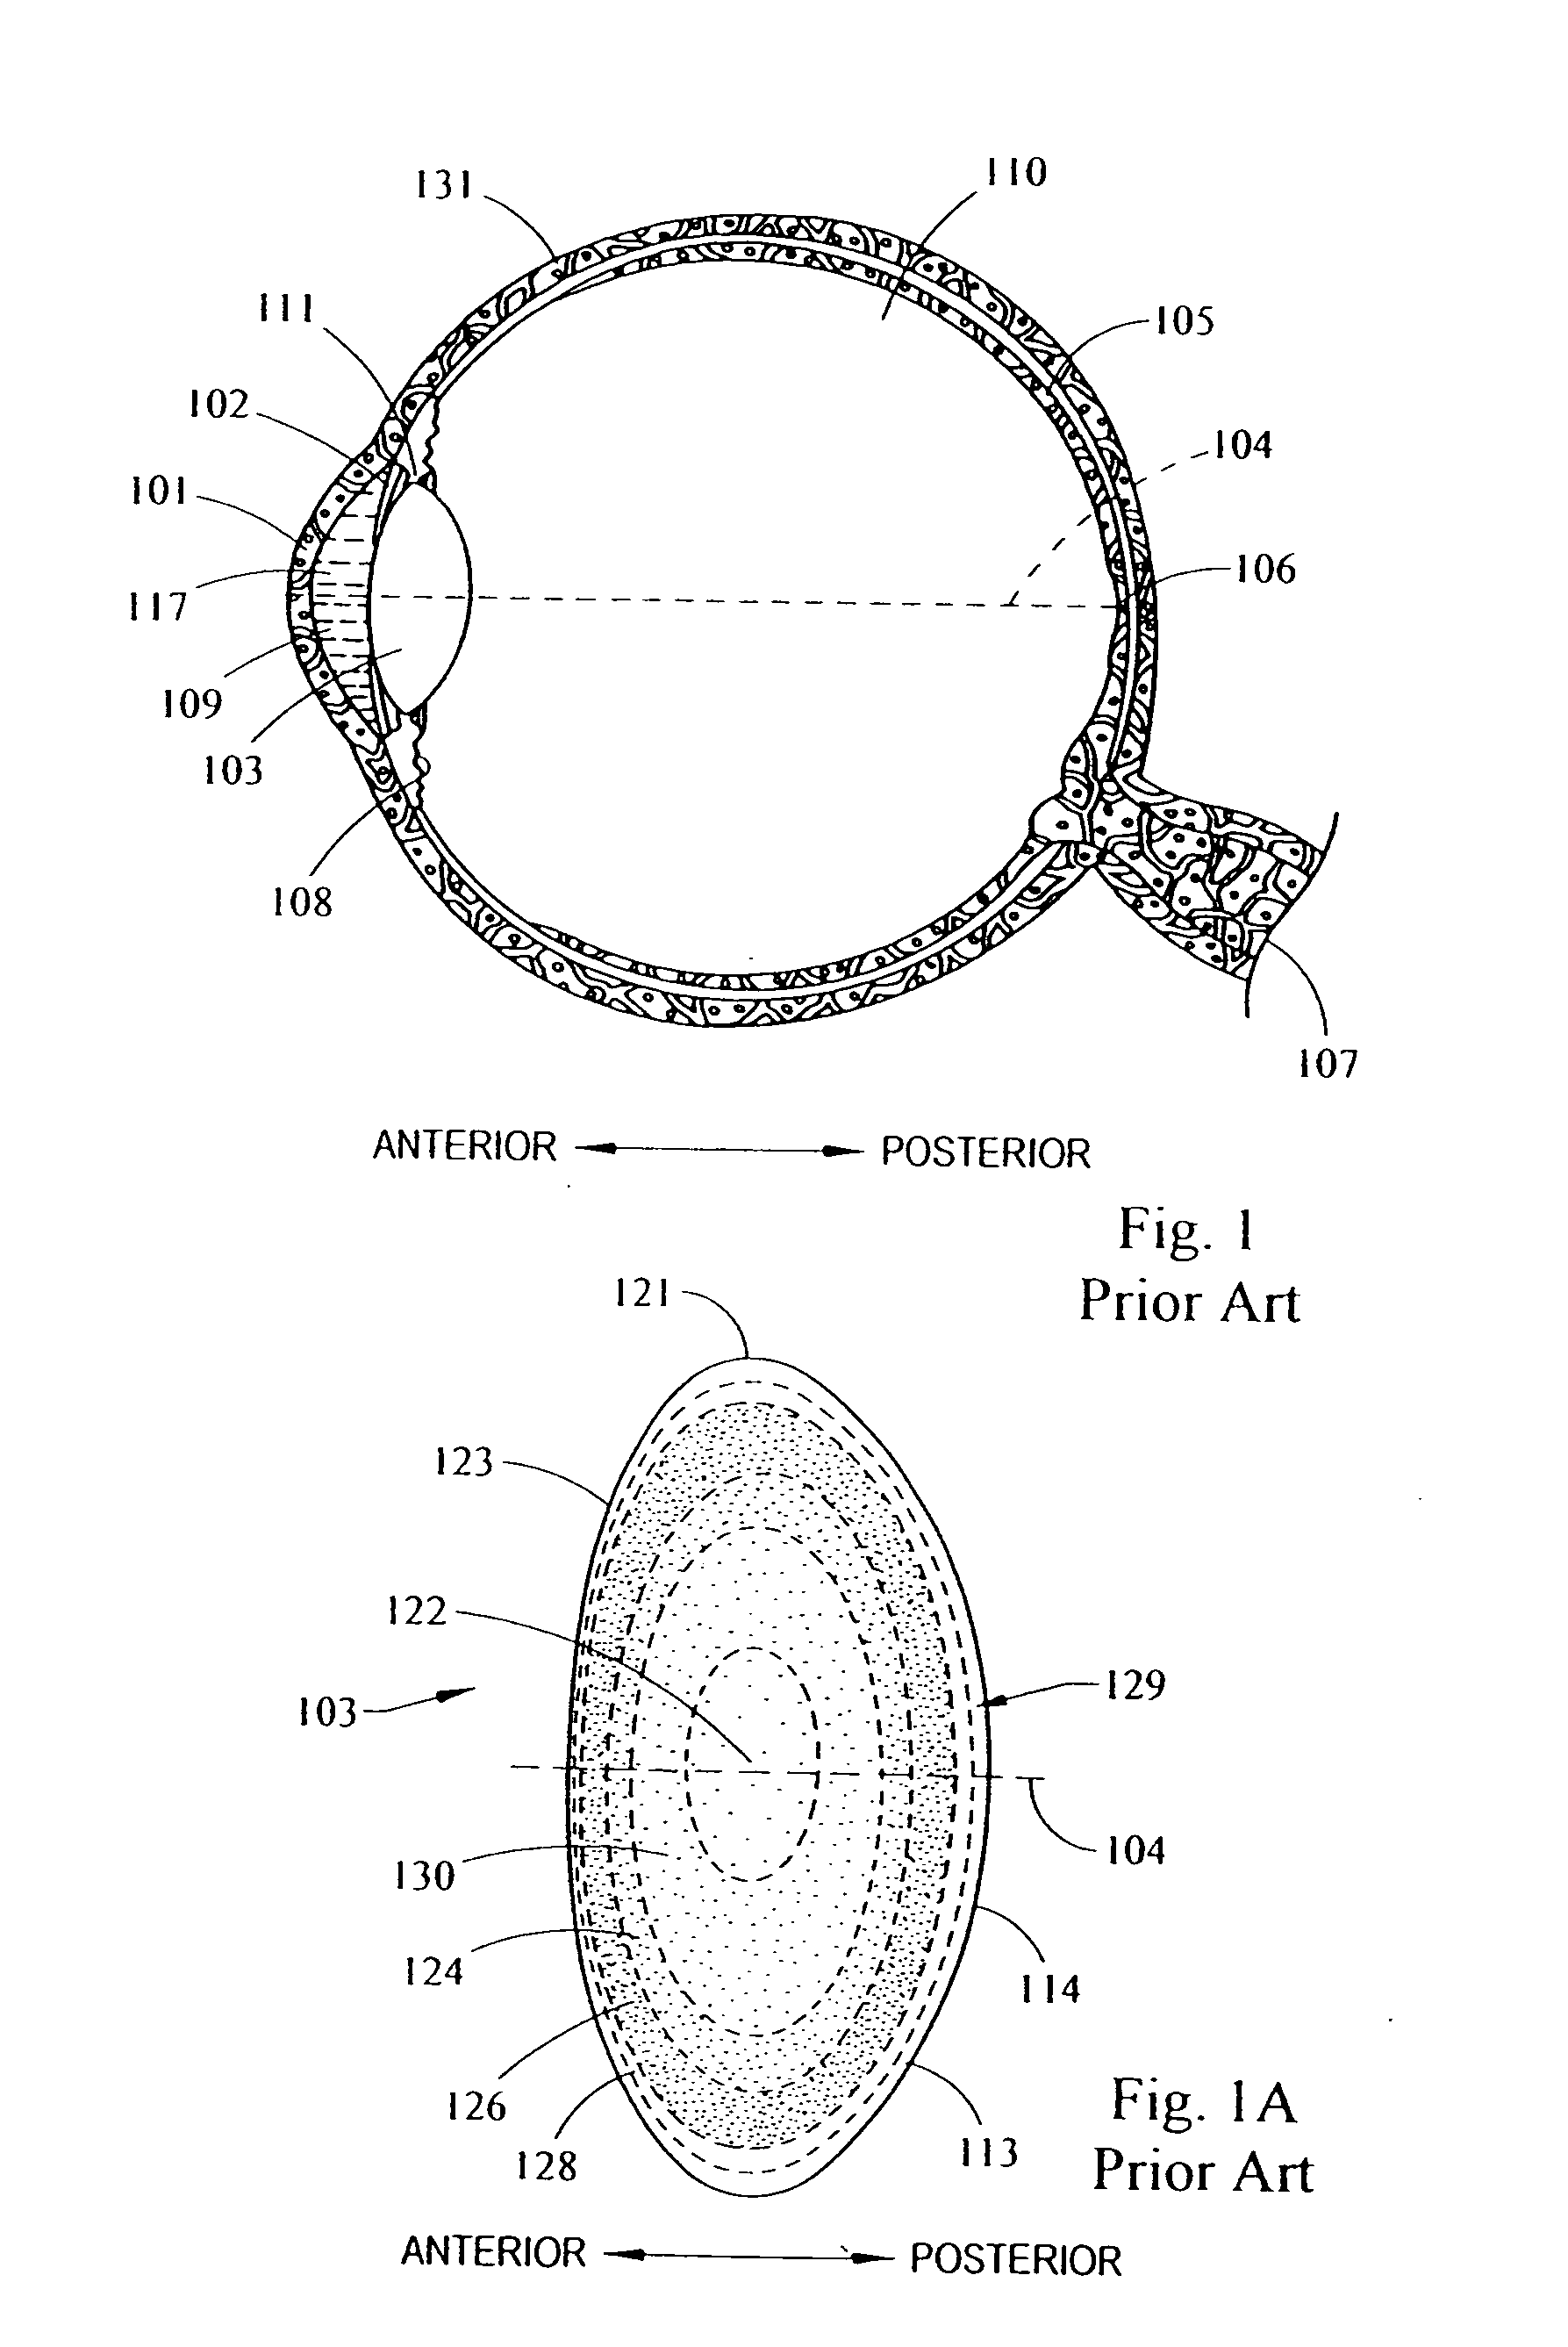 System and method for improving the accommodative amplitude and increasing the refractive power of the human lens with a laser